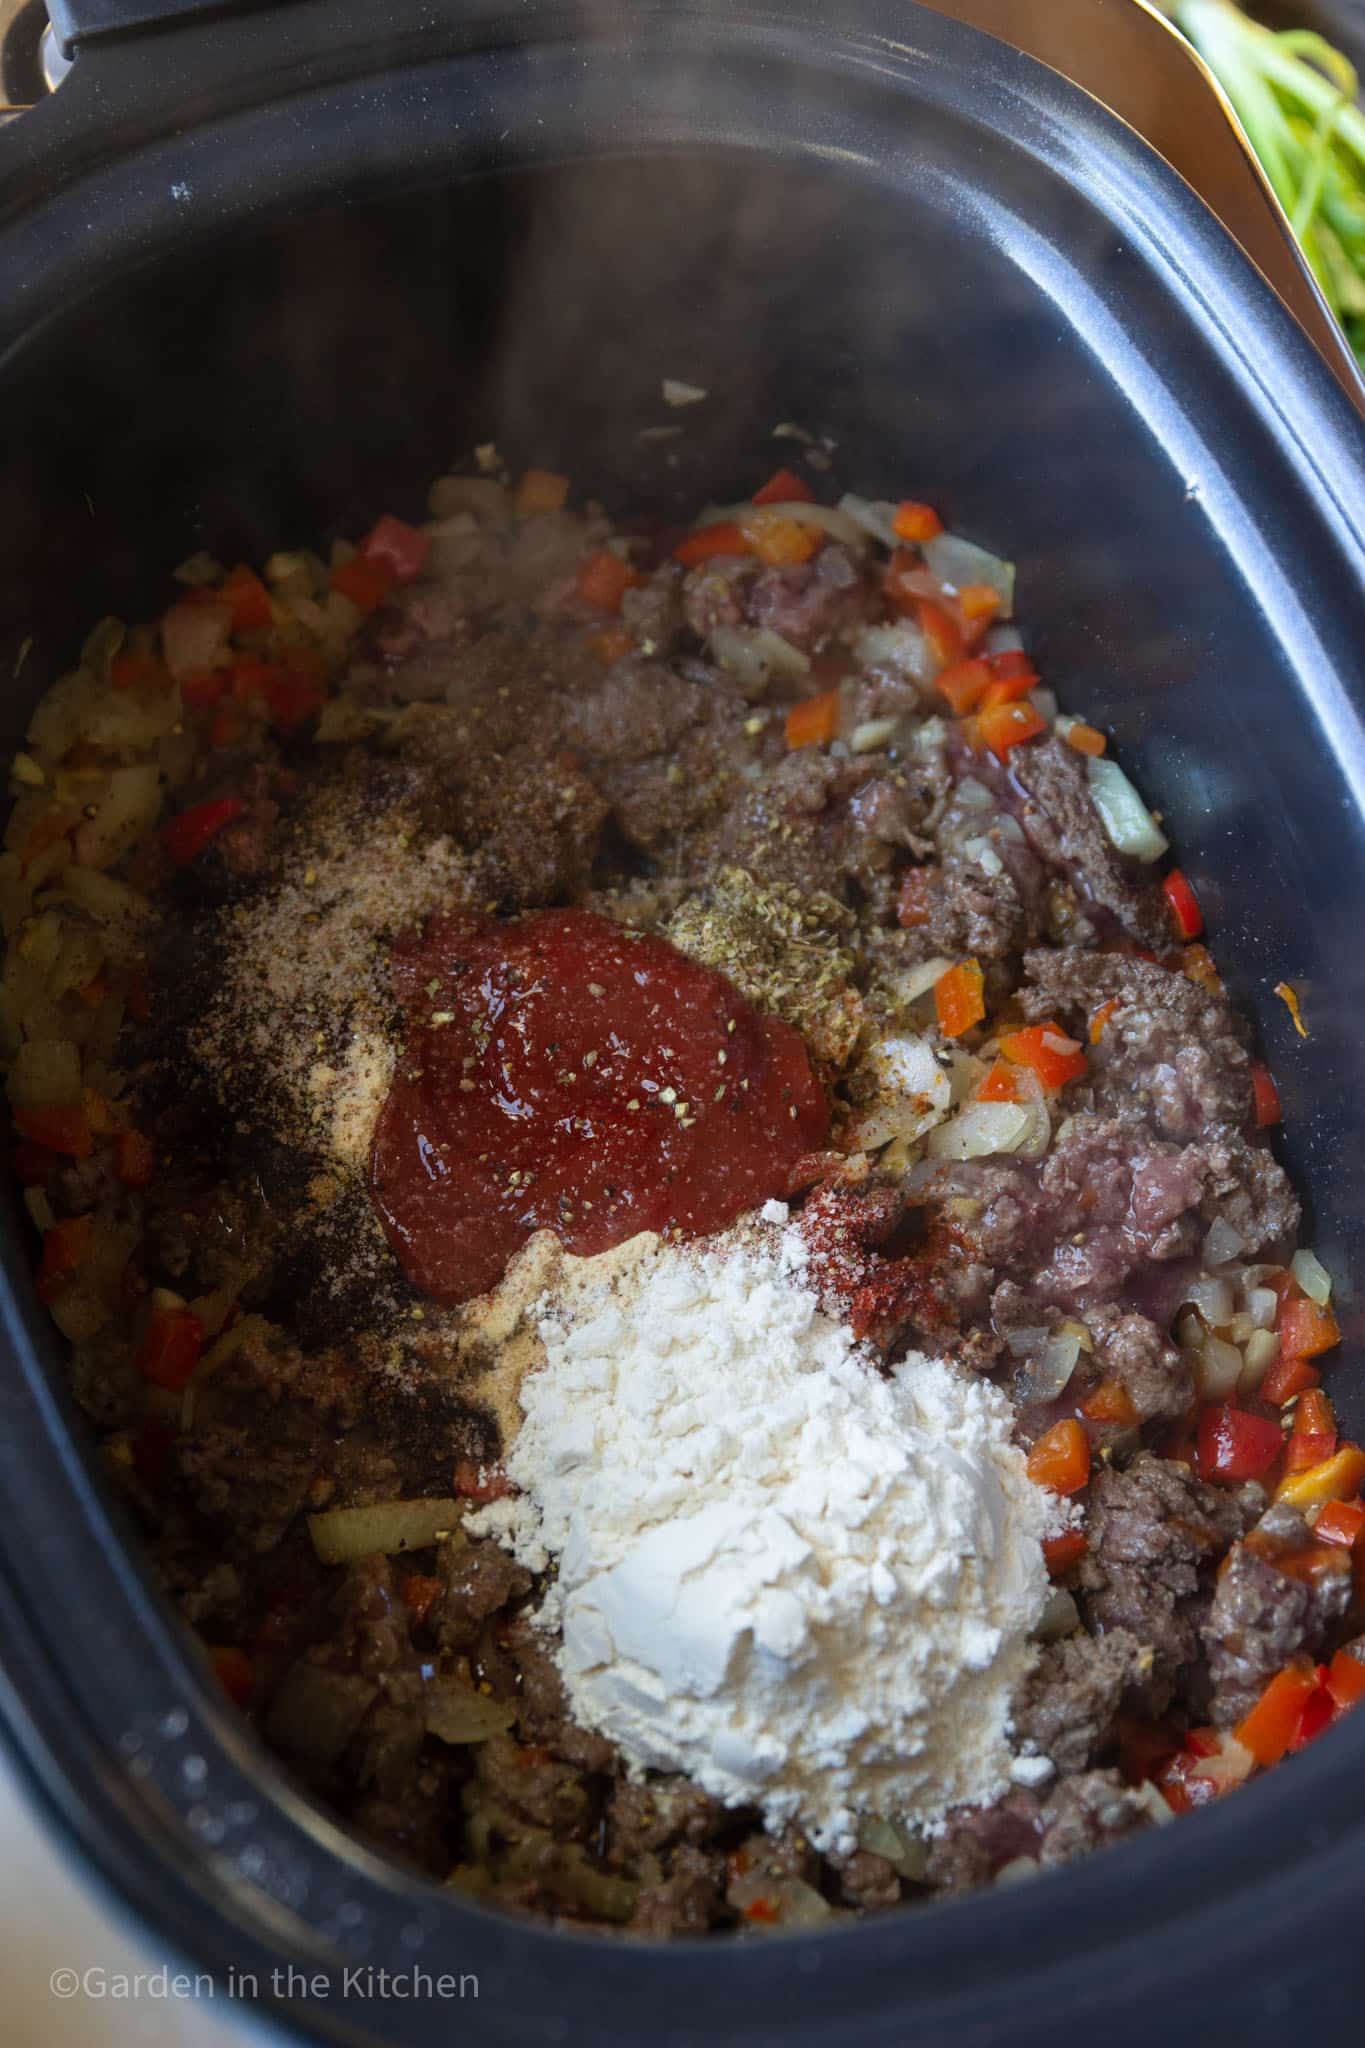 ingredients for venison chili cooking together in a large slow cooker.